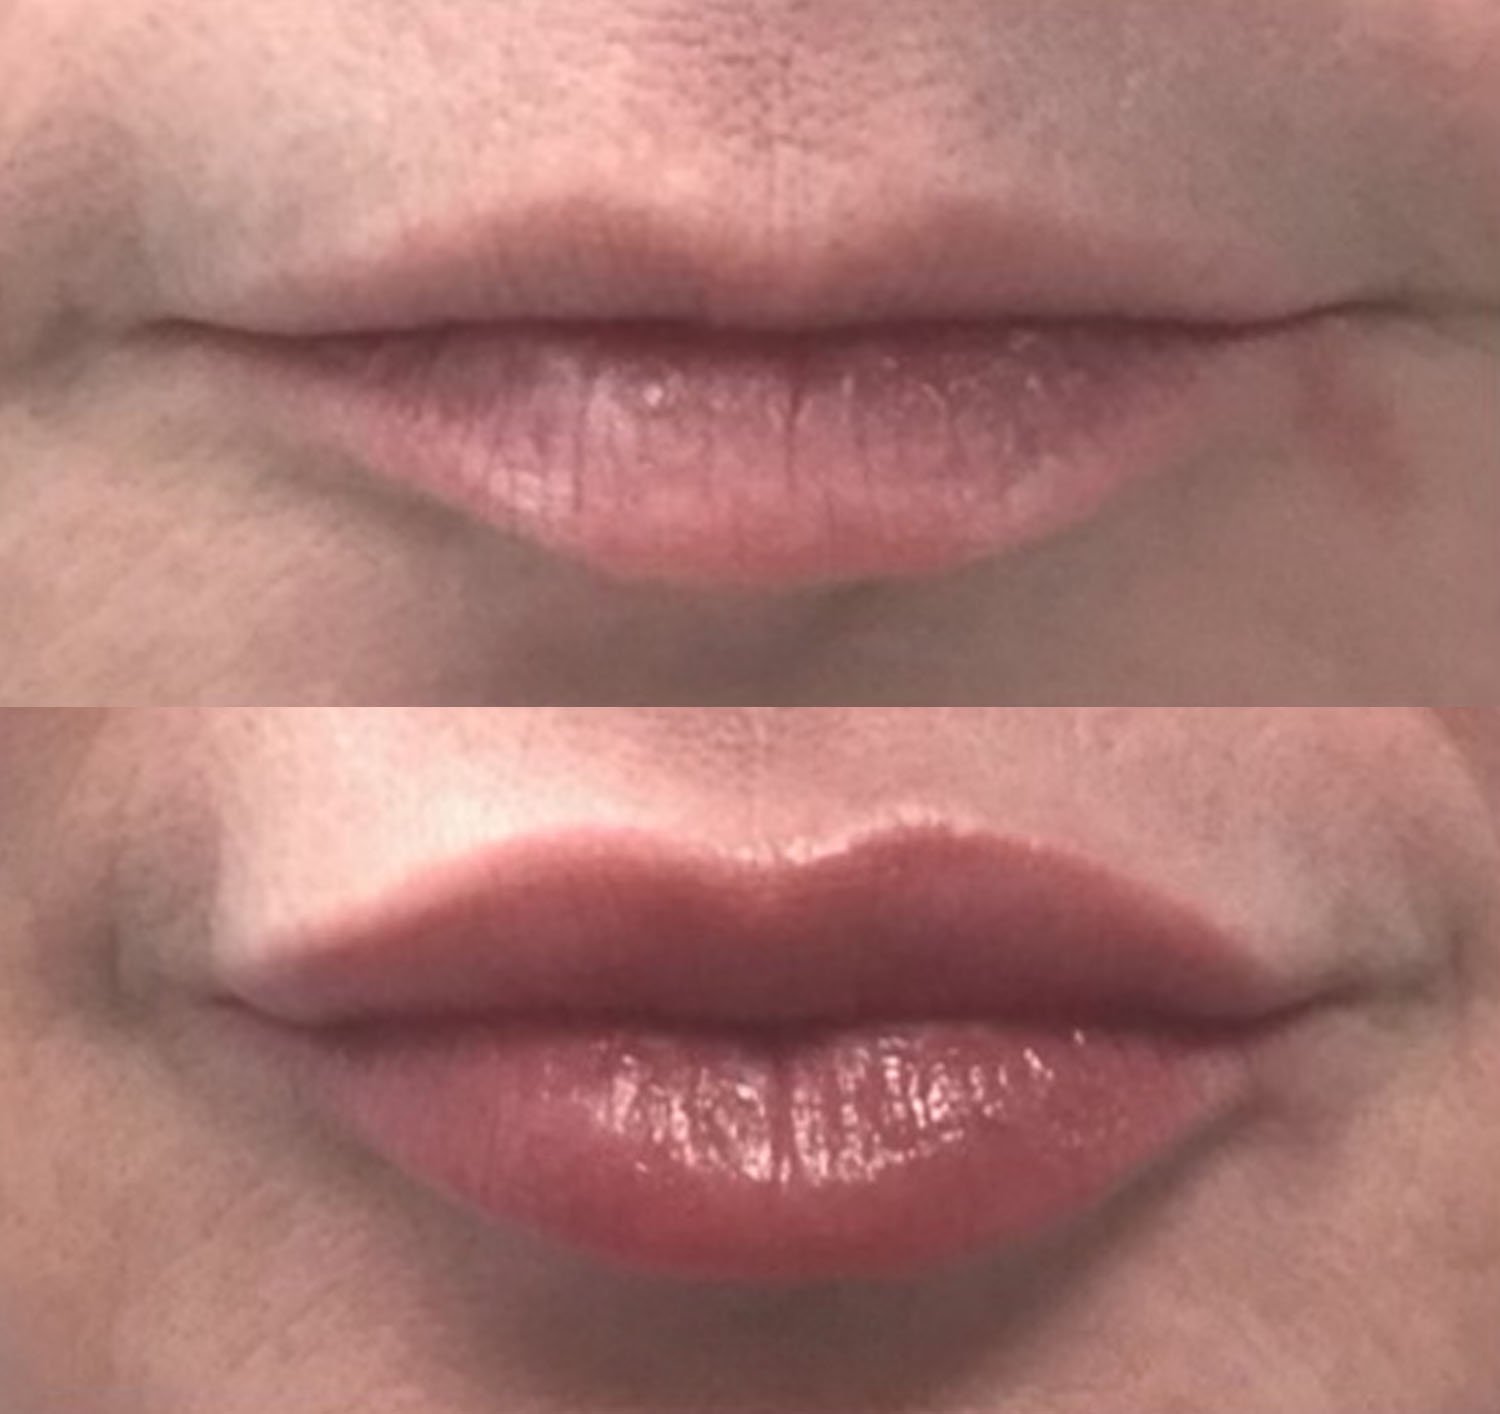 Christine Yanikian lip filler before and after.jpg